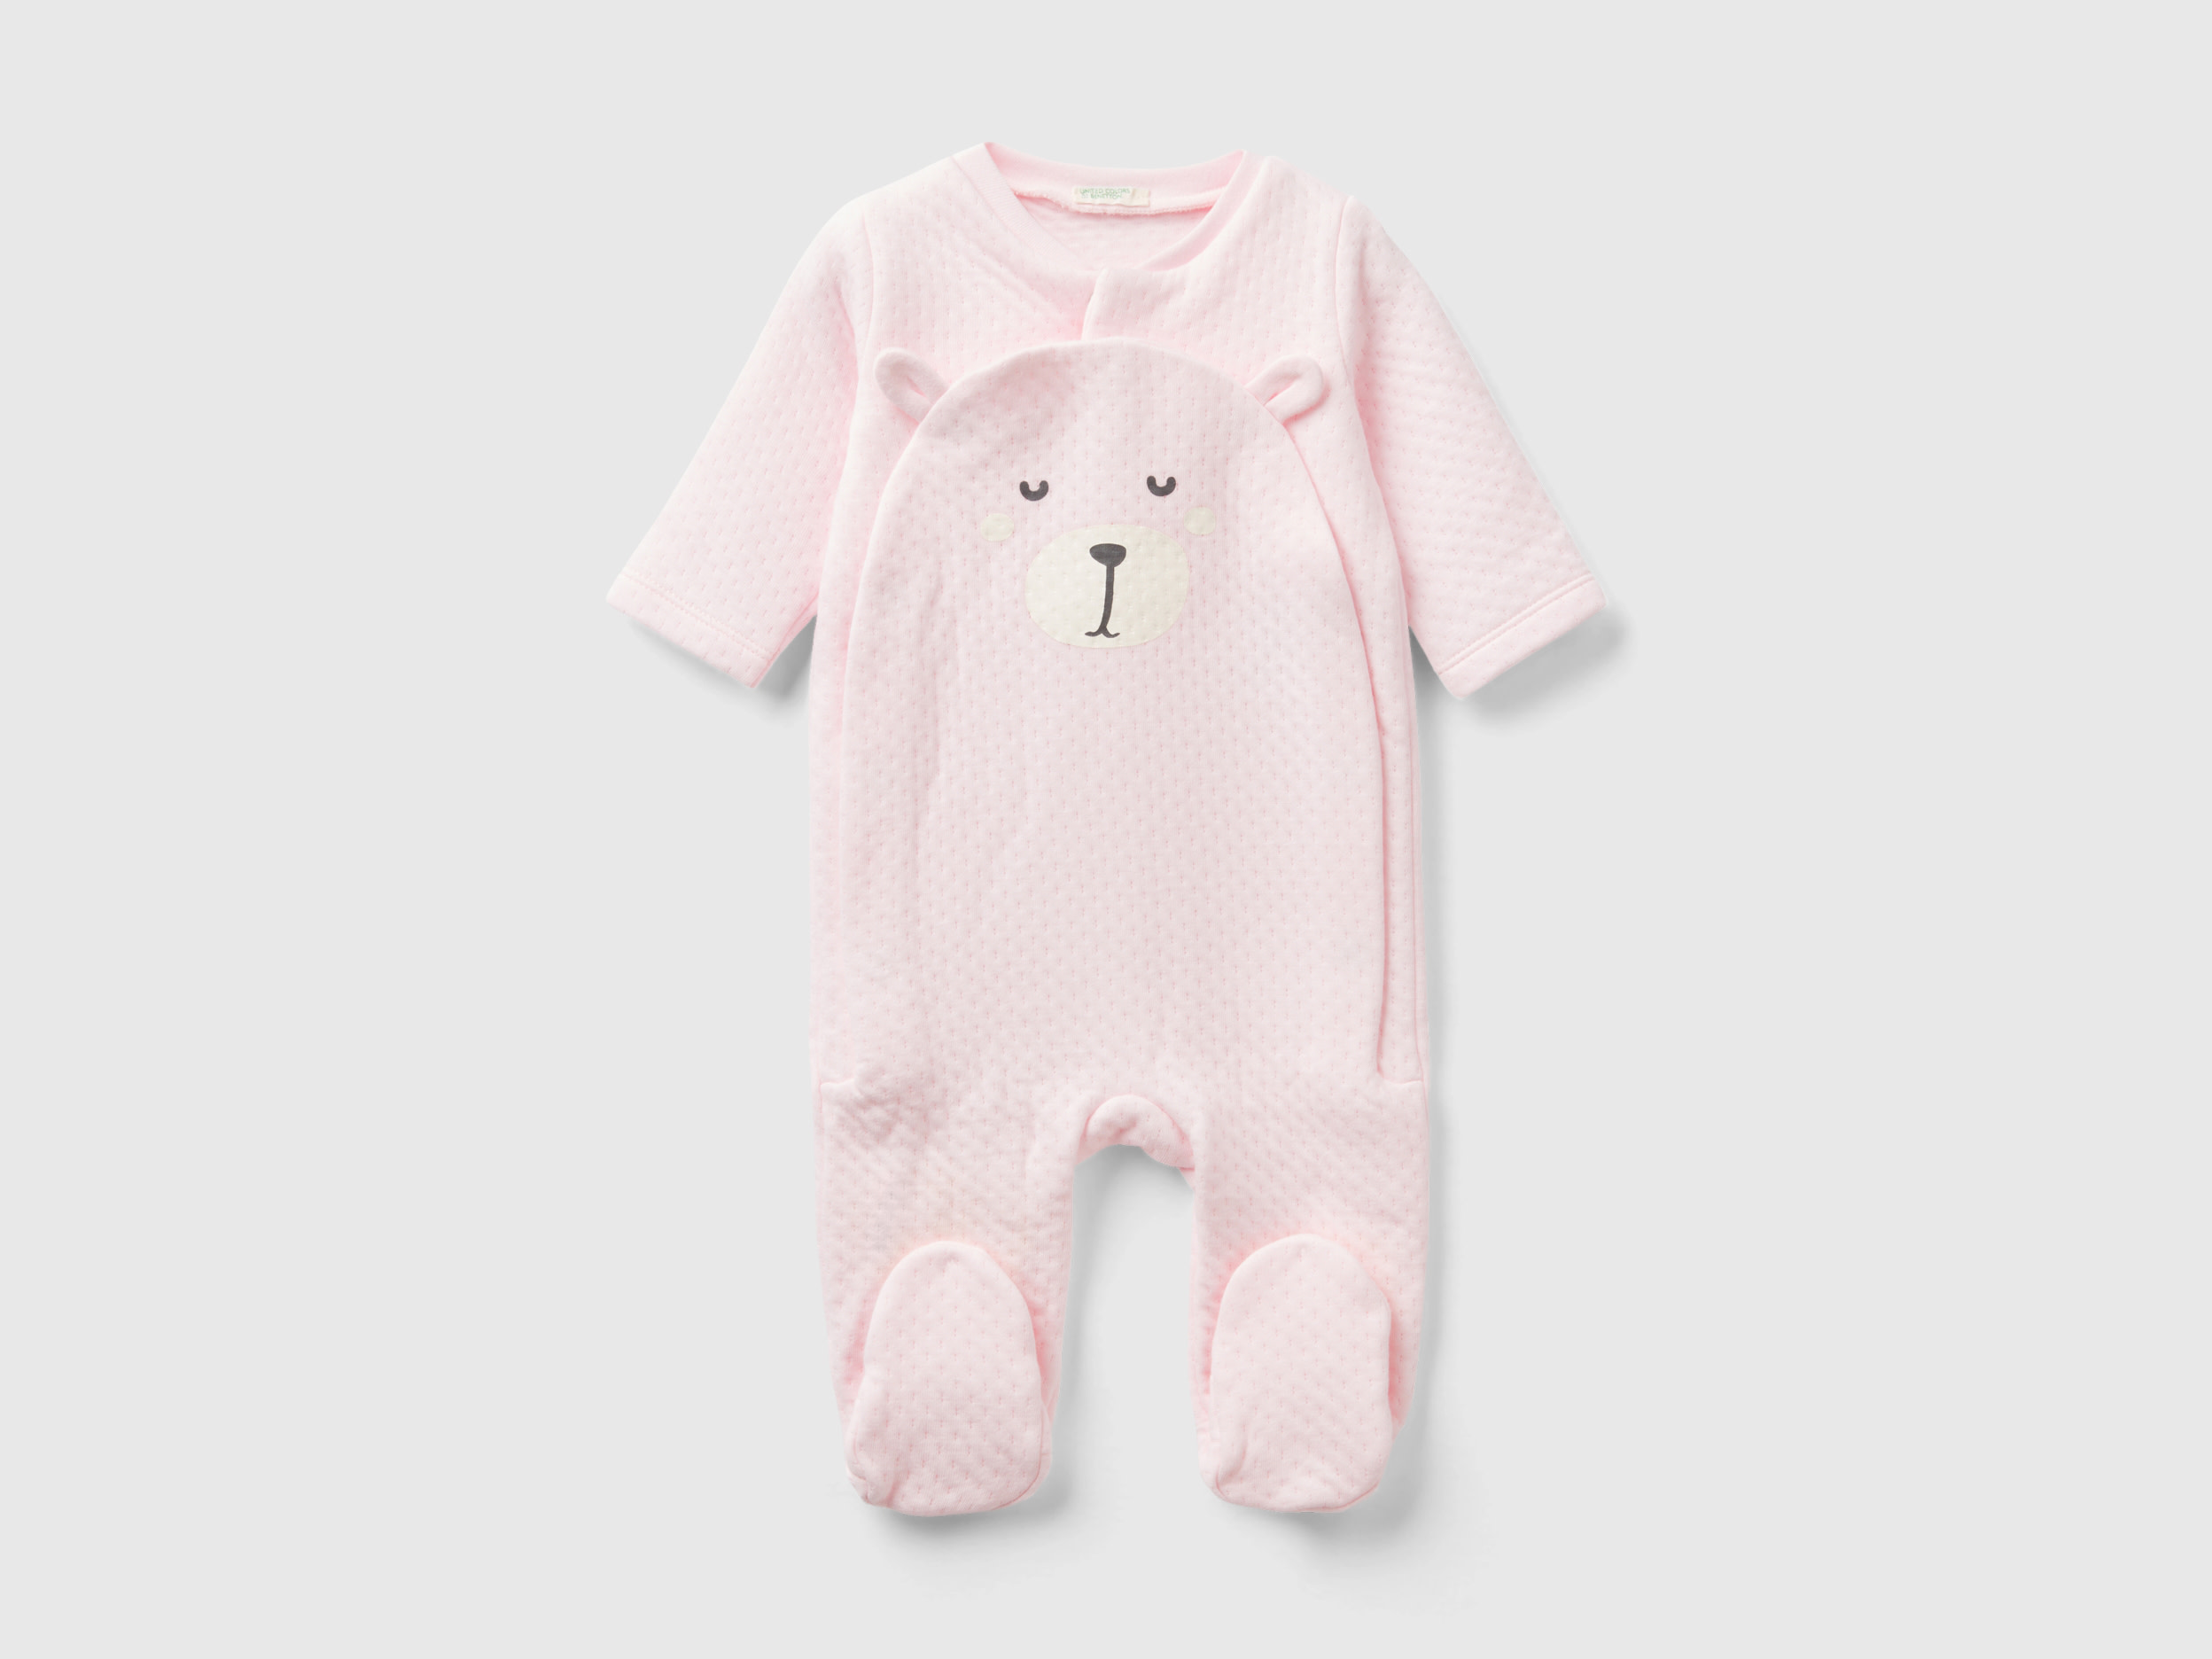 Benetton, Teddy Bear Onesie With Quilted Look, size 9-12, Soft Pink, Kids